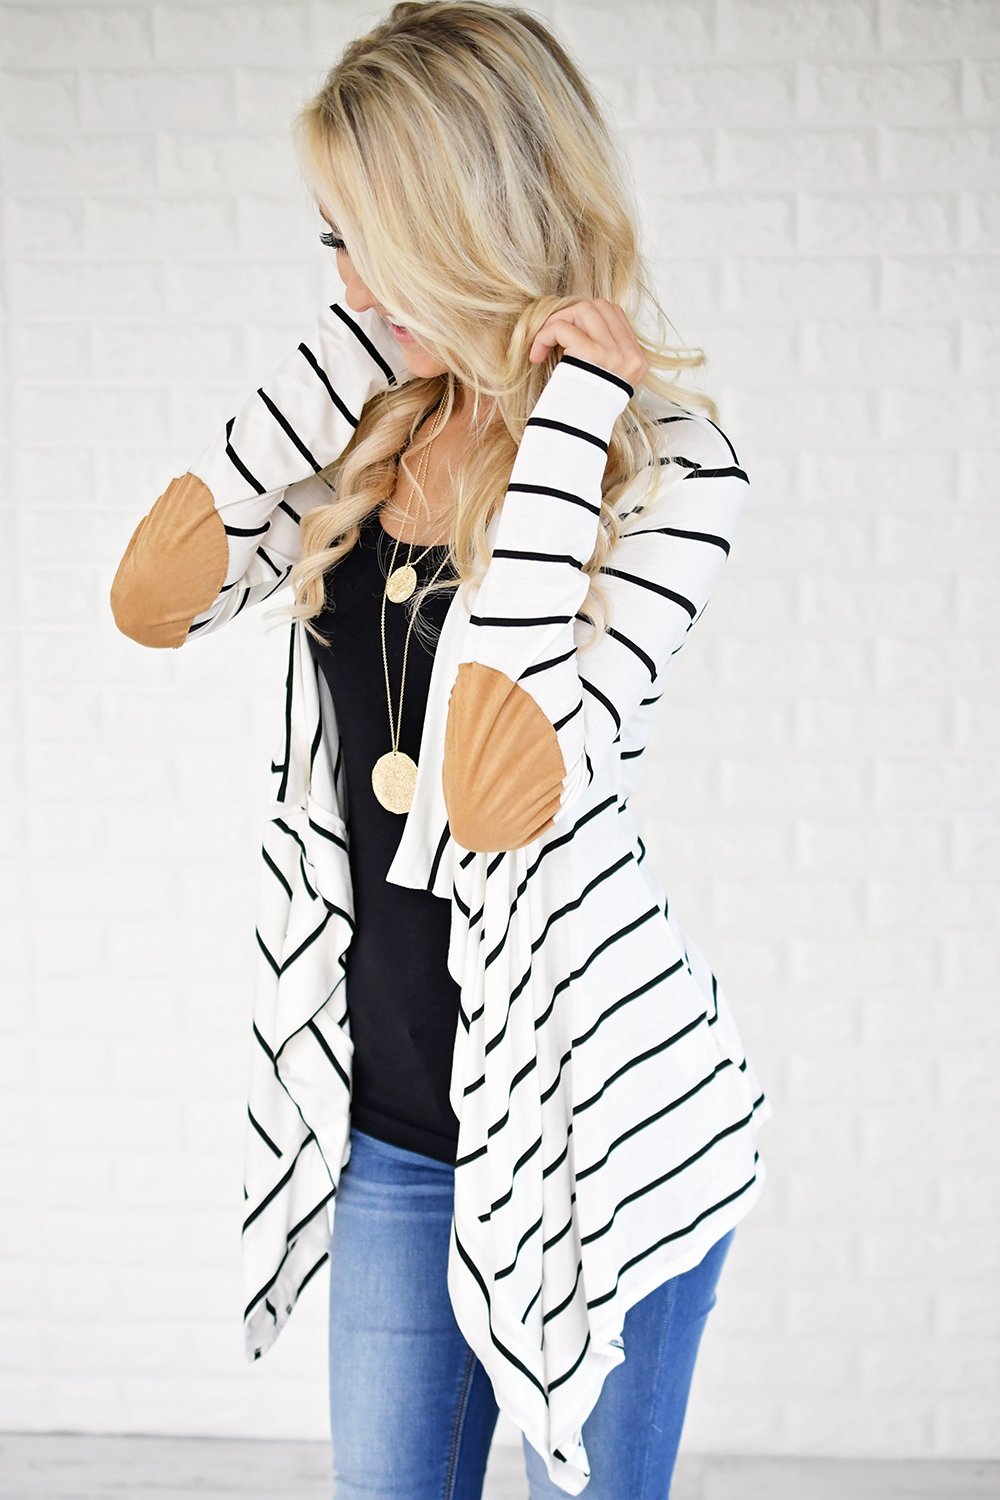 Black & White Striped Cardigan with Elbow Patches